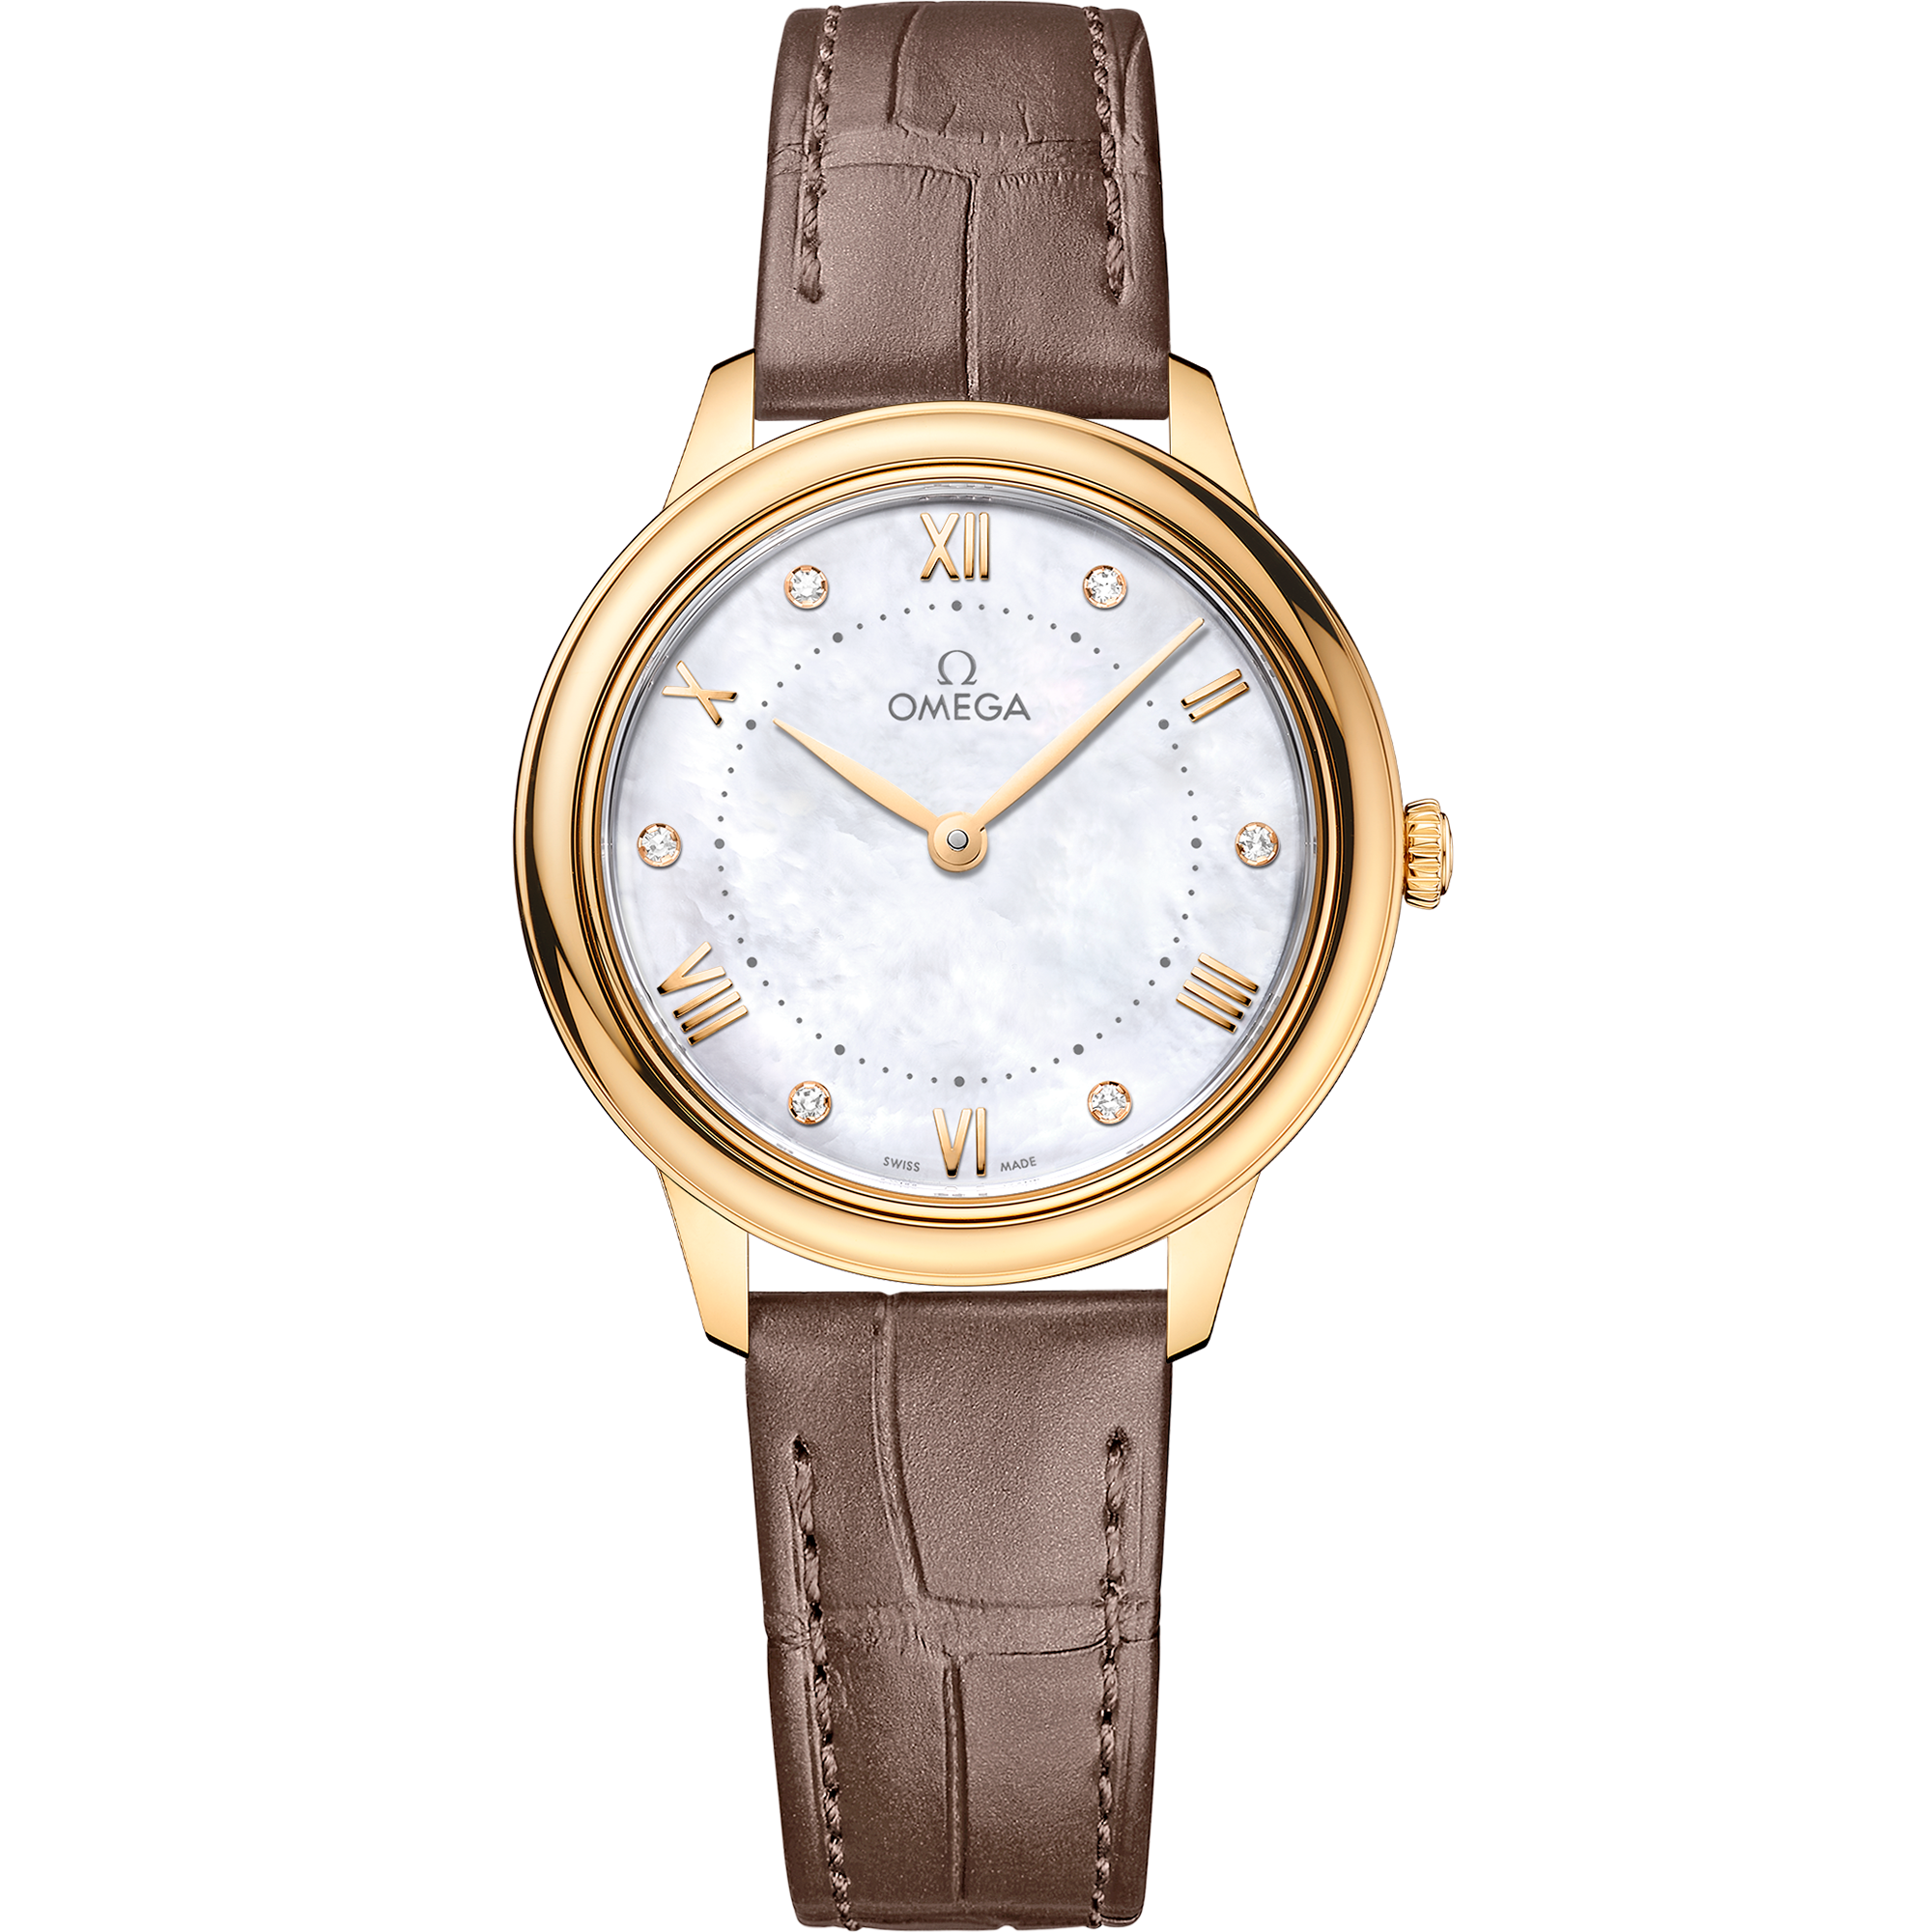 De Ville 30 mm, yellow gold on leather strap - 434.53.30.60.55.002